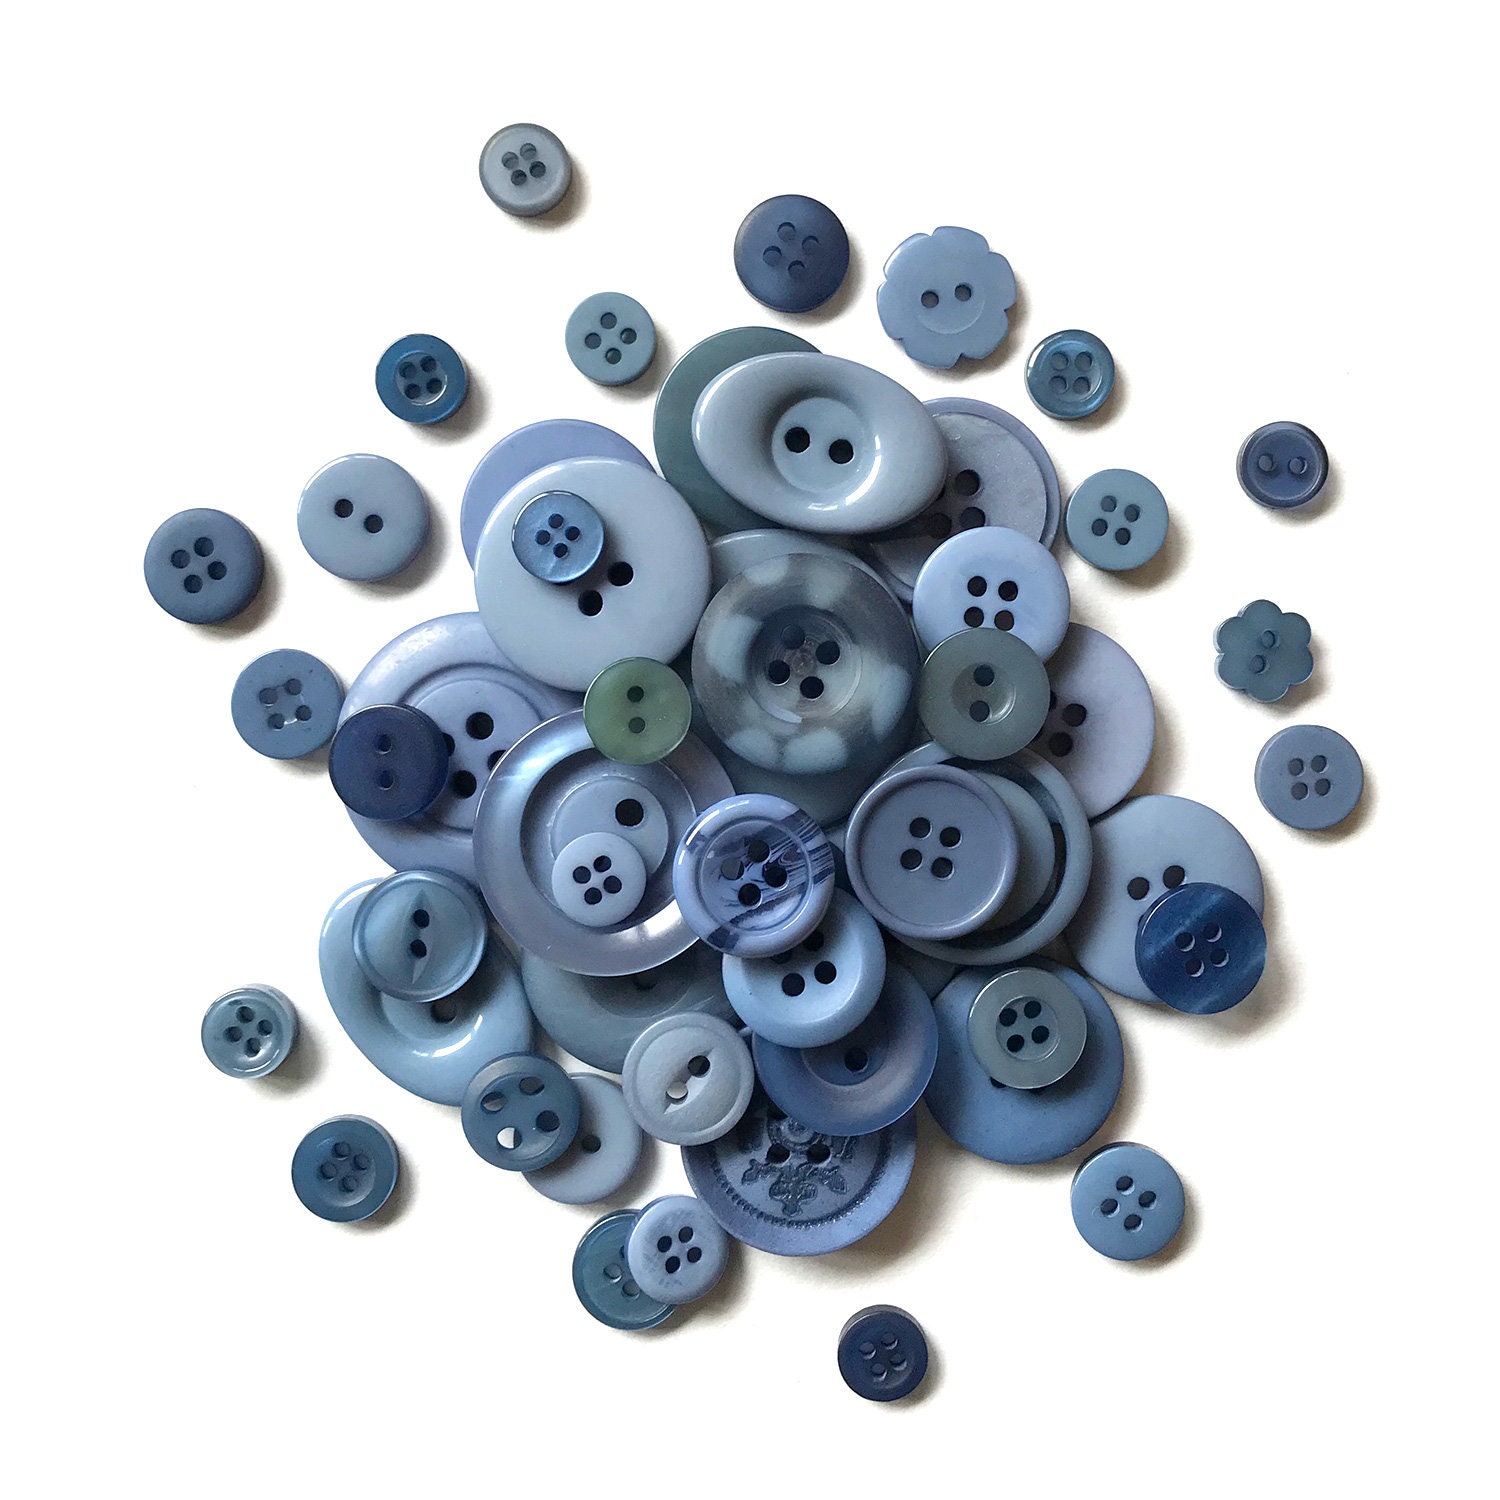 Buttons Galore and More Craft & Sewing Buttons - Quilt Hearts - 60